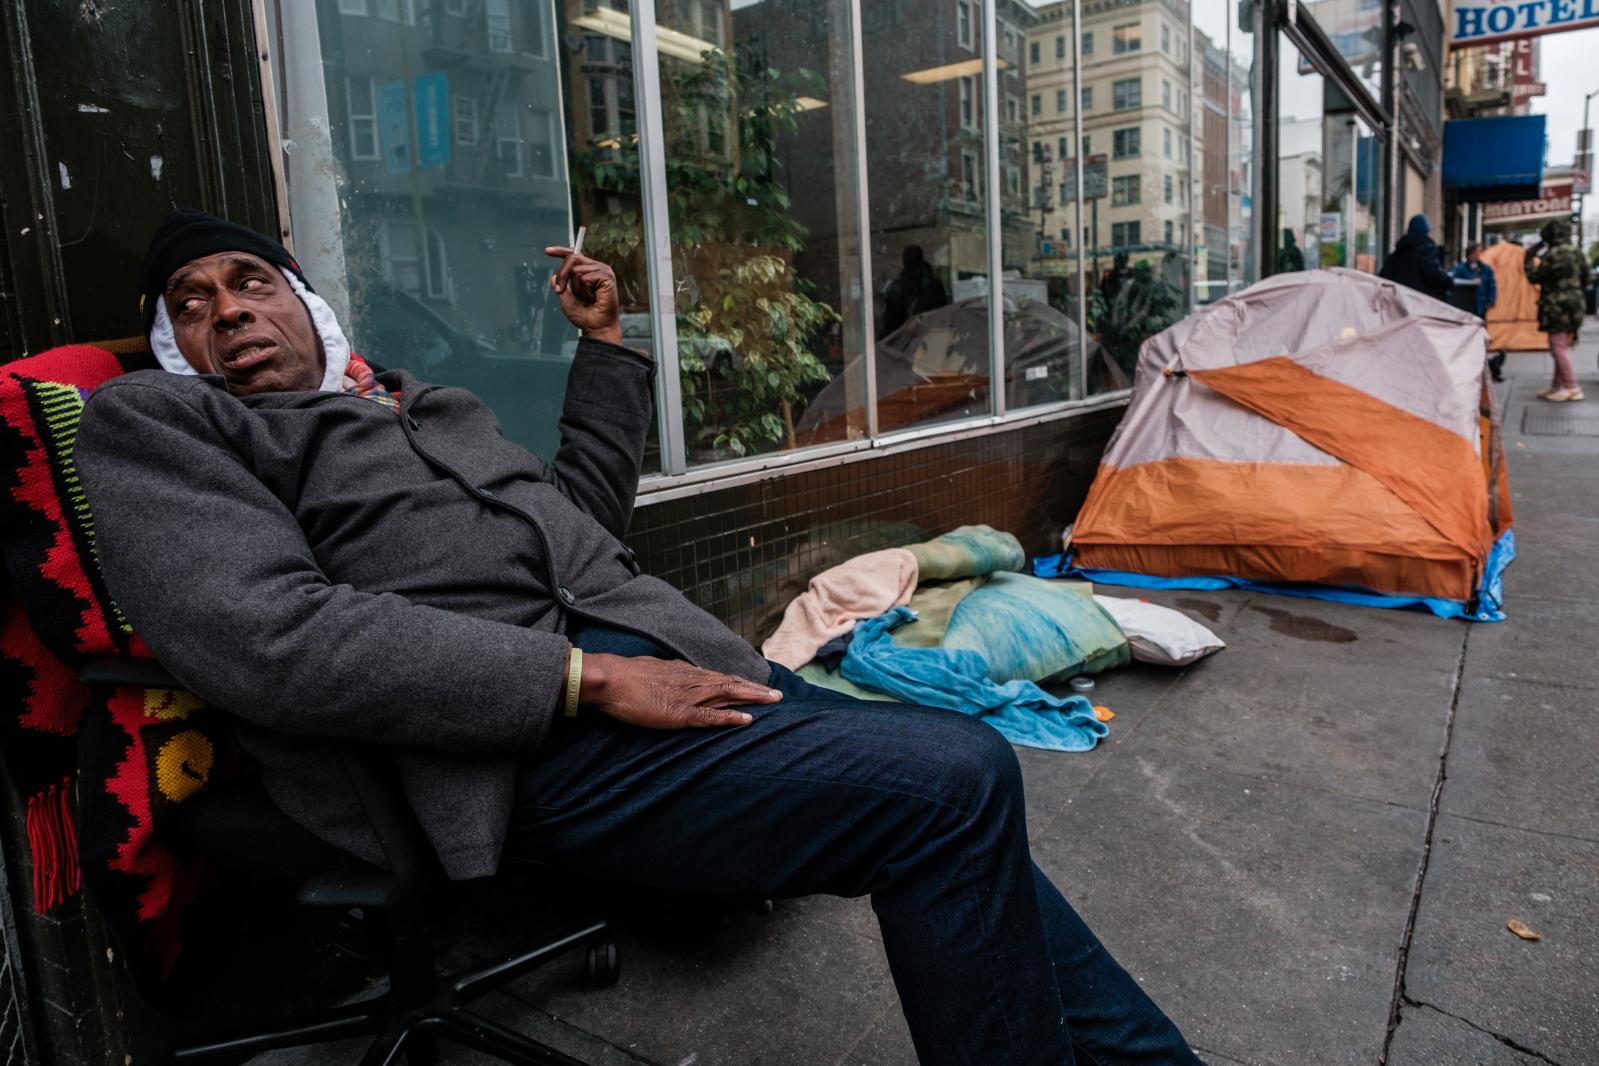 Image from San Francisco's Housing Crisis - Charles Johnson, a homeless man, sits on the sidewalk...